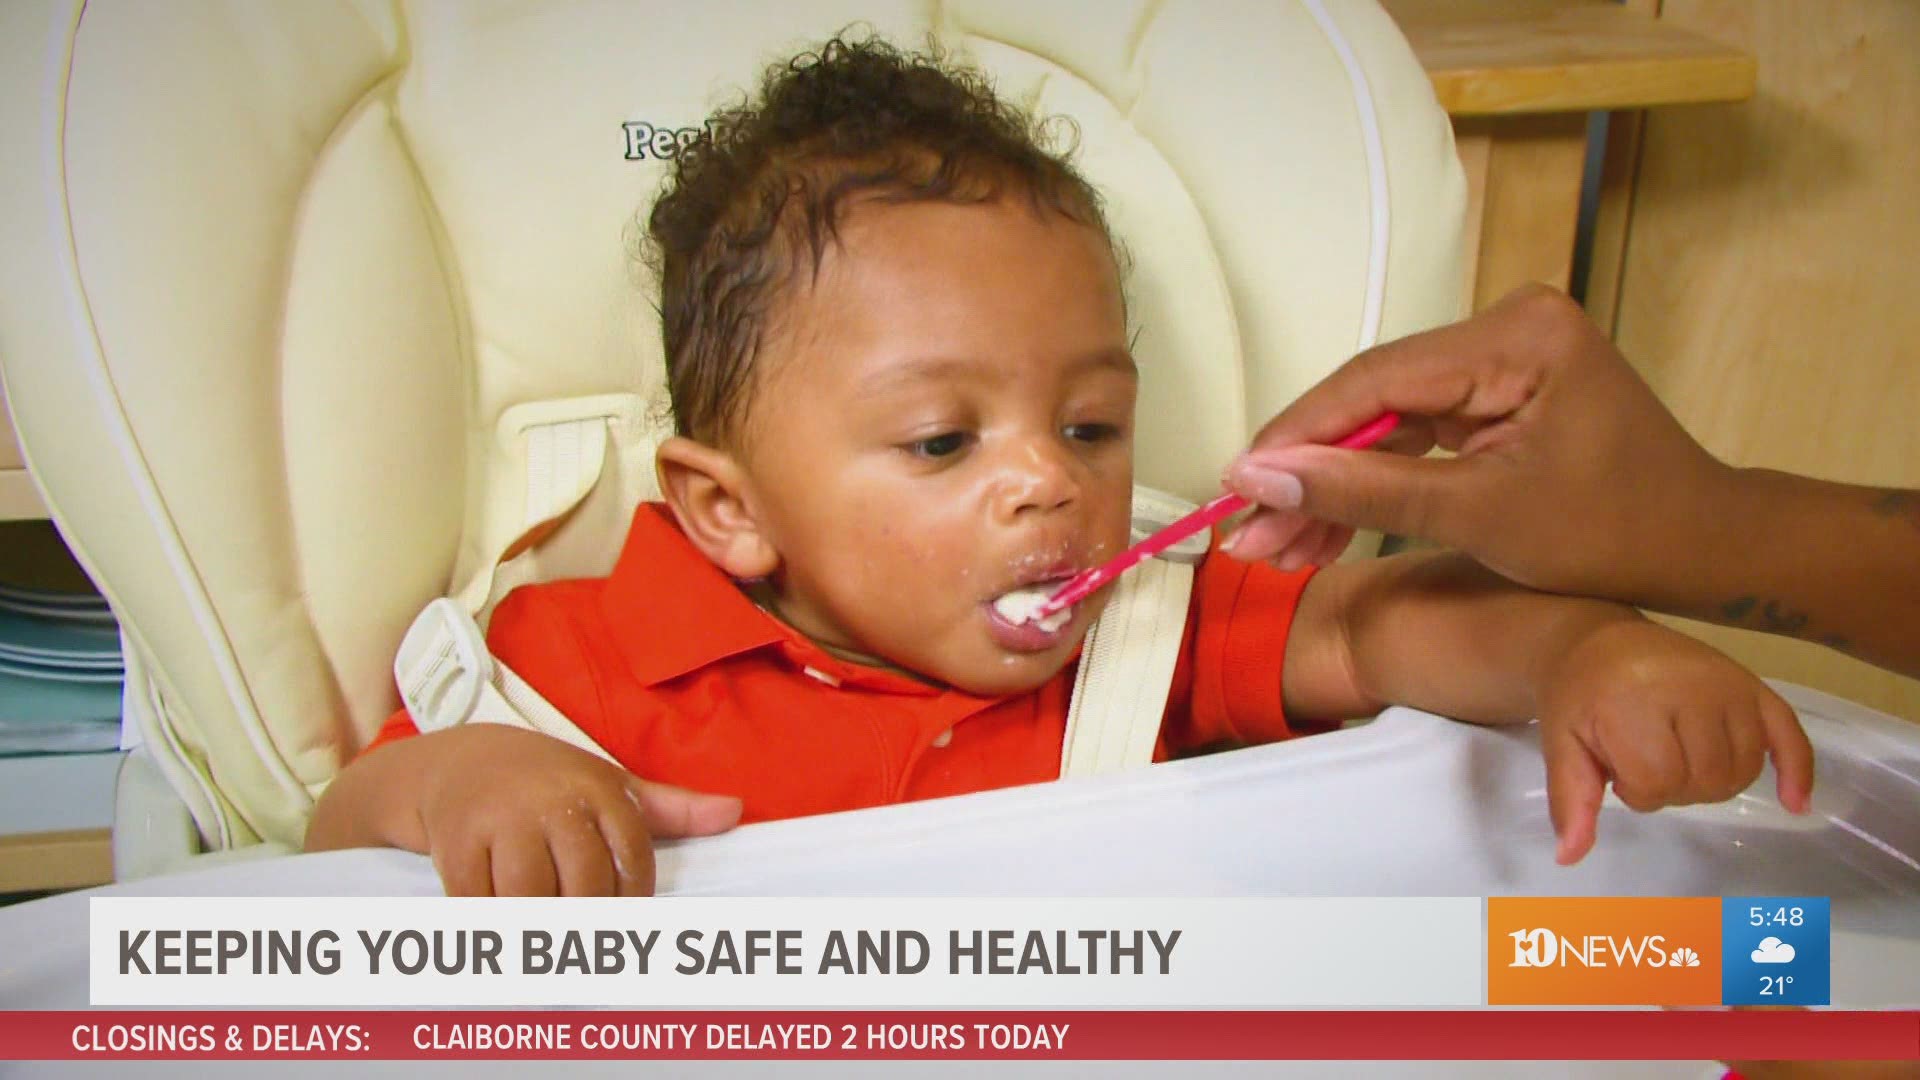 "If parents have a brand of baby food in their cabinet, they don't need to throw it out."